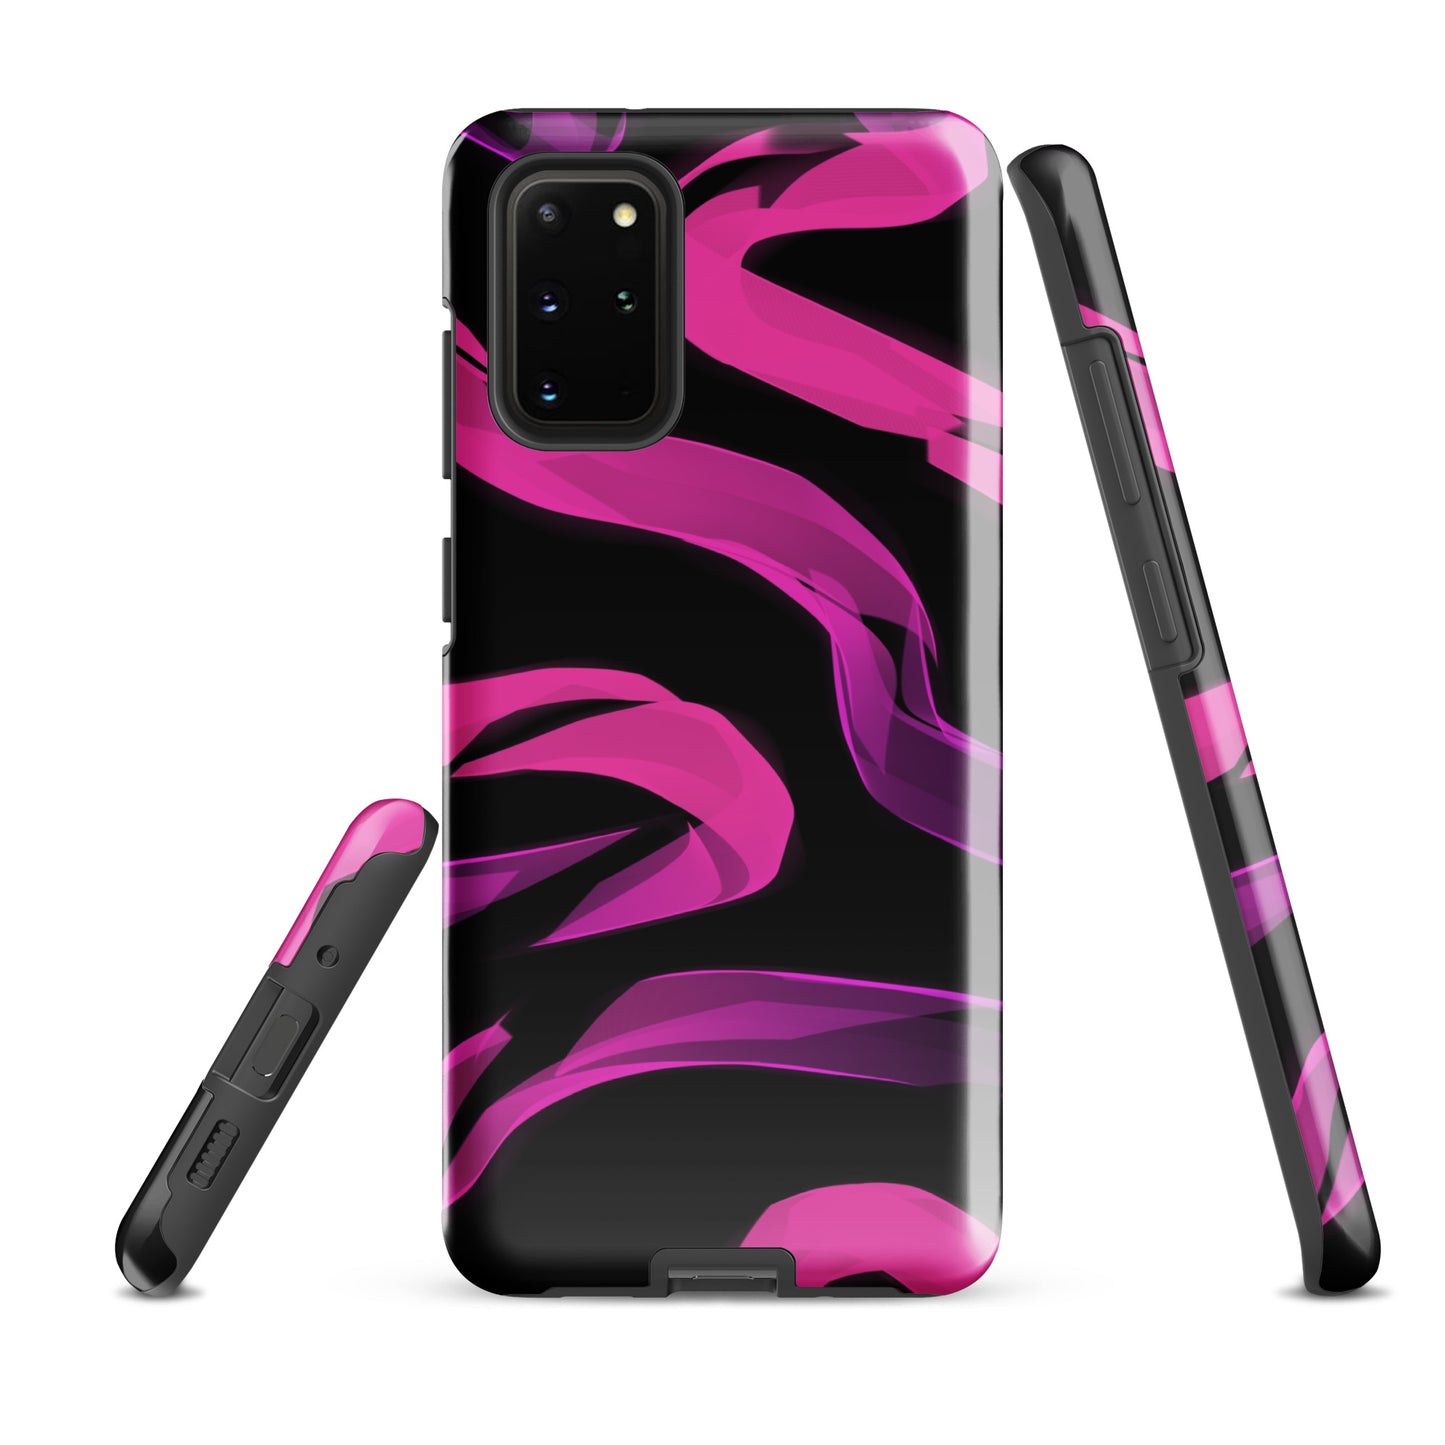 A Bright Pink Neon Sketch Case for the Samsung Galaxy S20 Plus